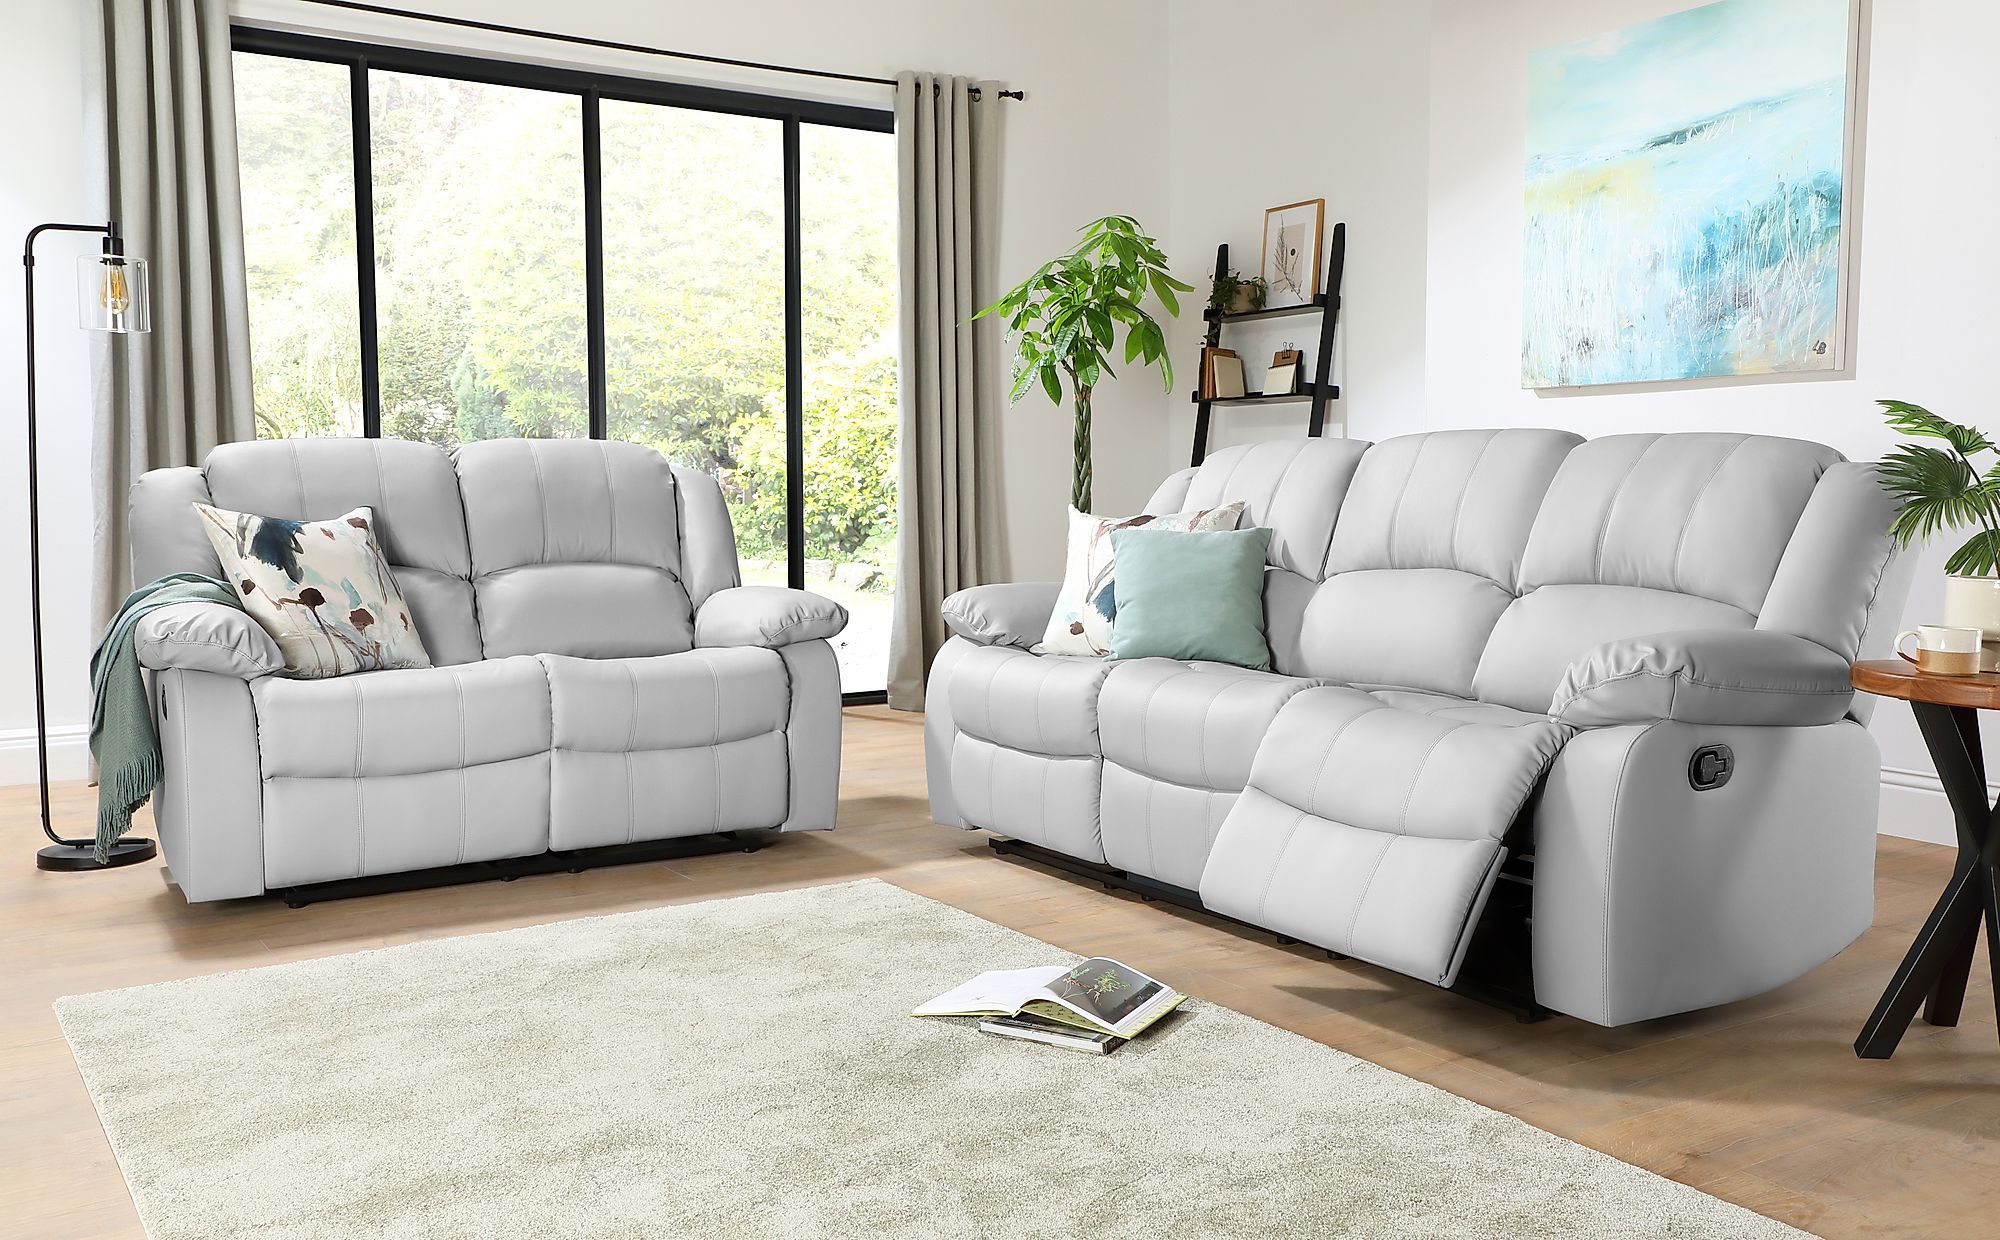 Dakota Light Grey Leather 3+2 Seater Recliner Sofa Set | Furniture Choice With Regard To Sofas In Light Gray (View 10 of 22)